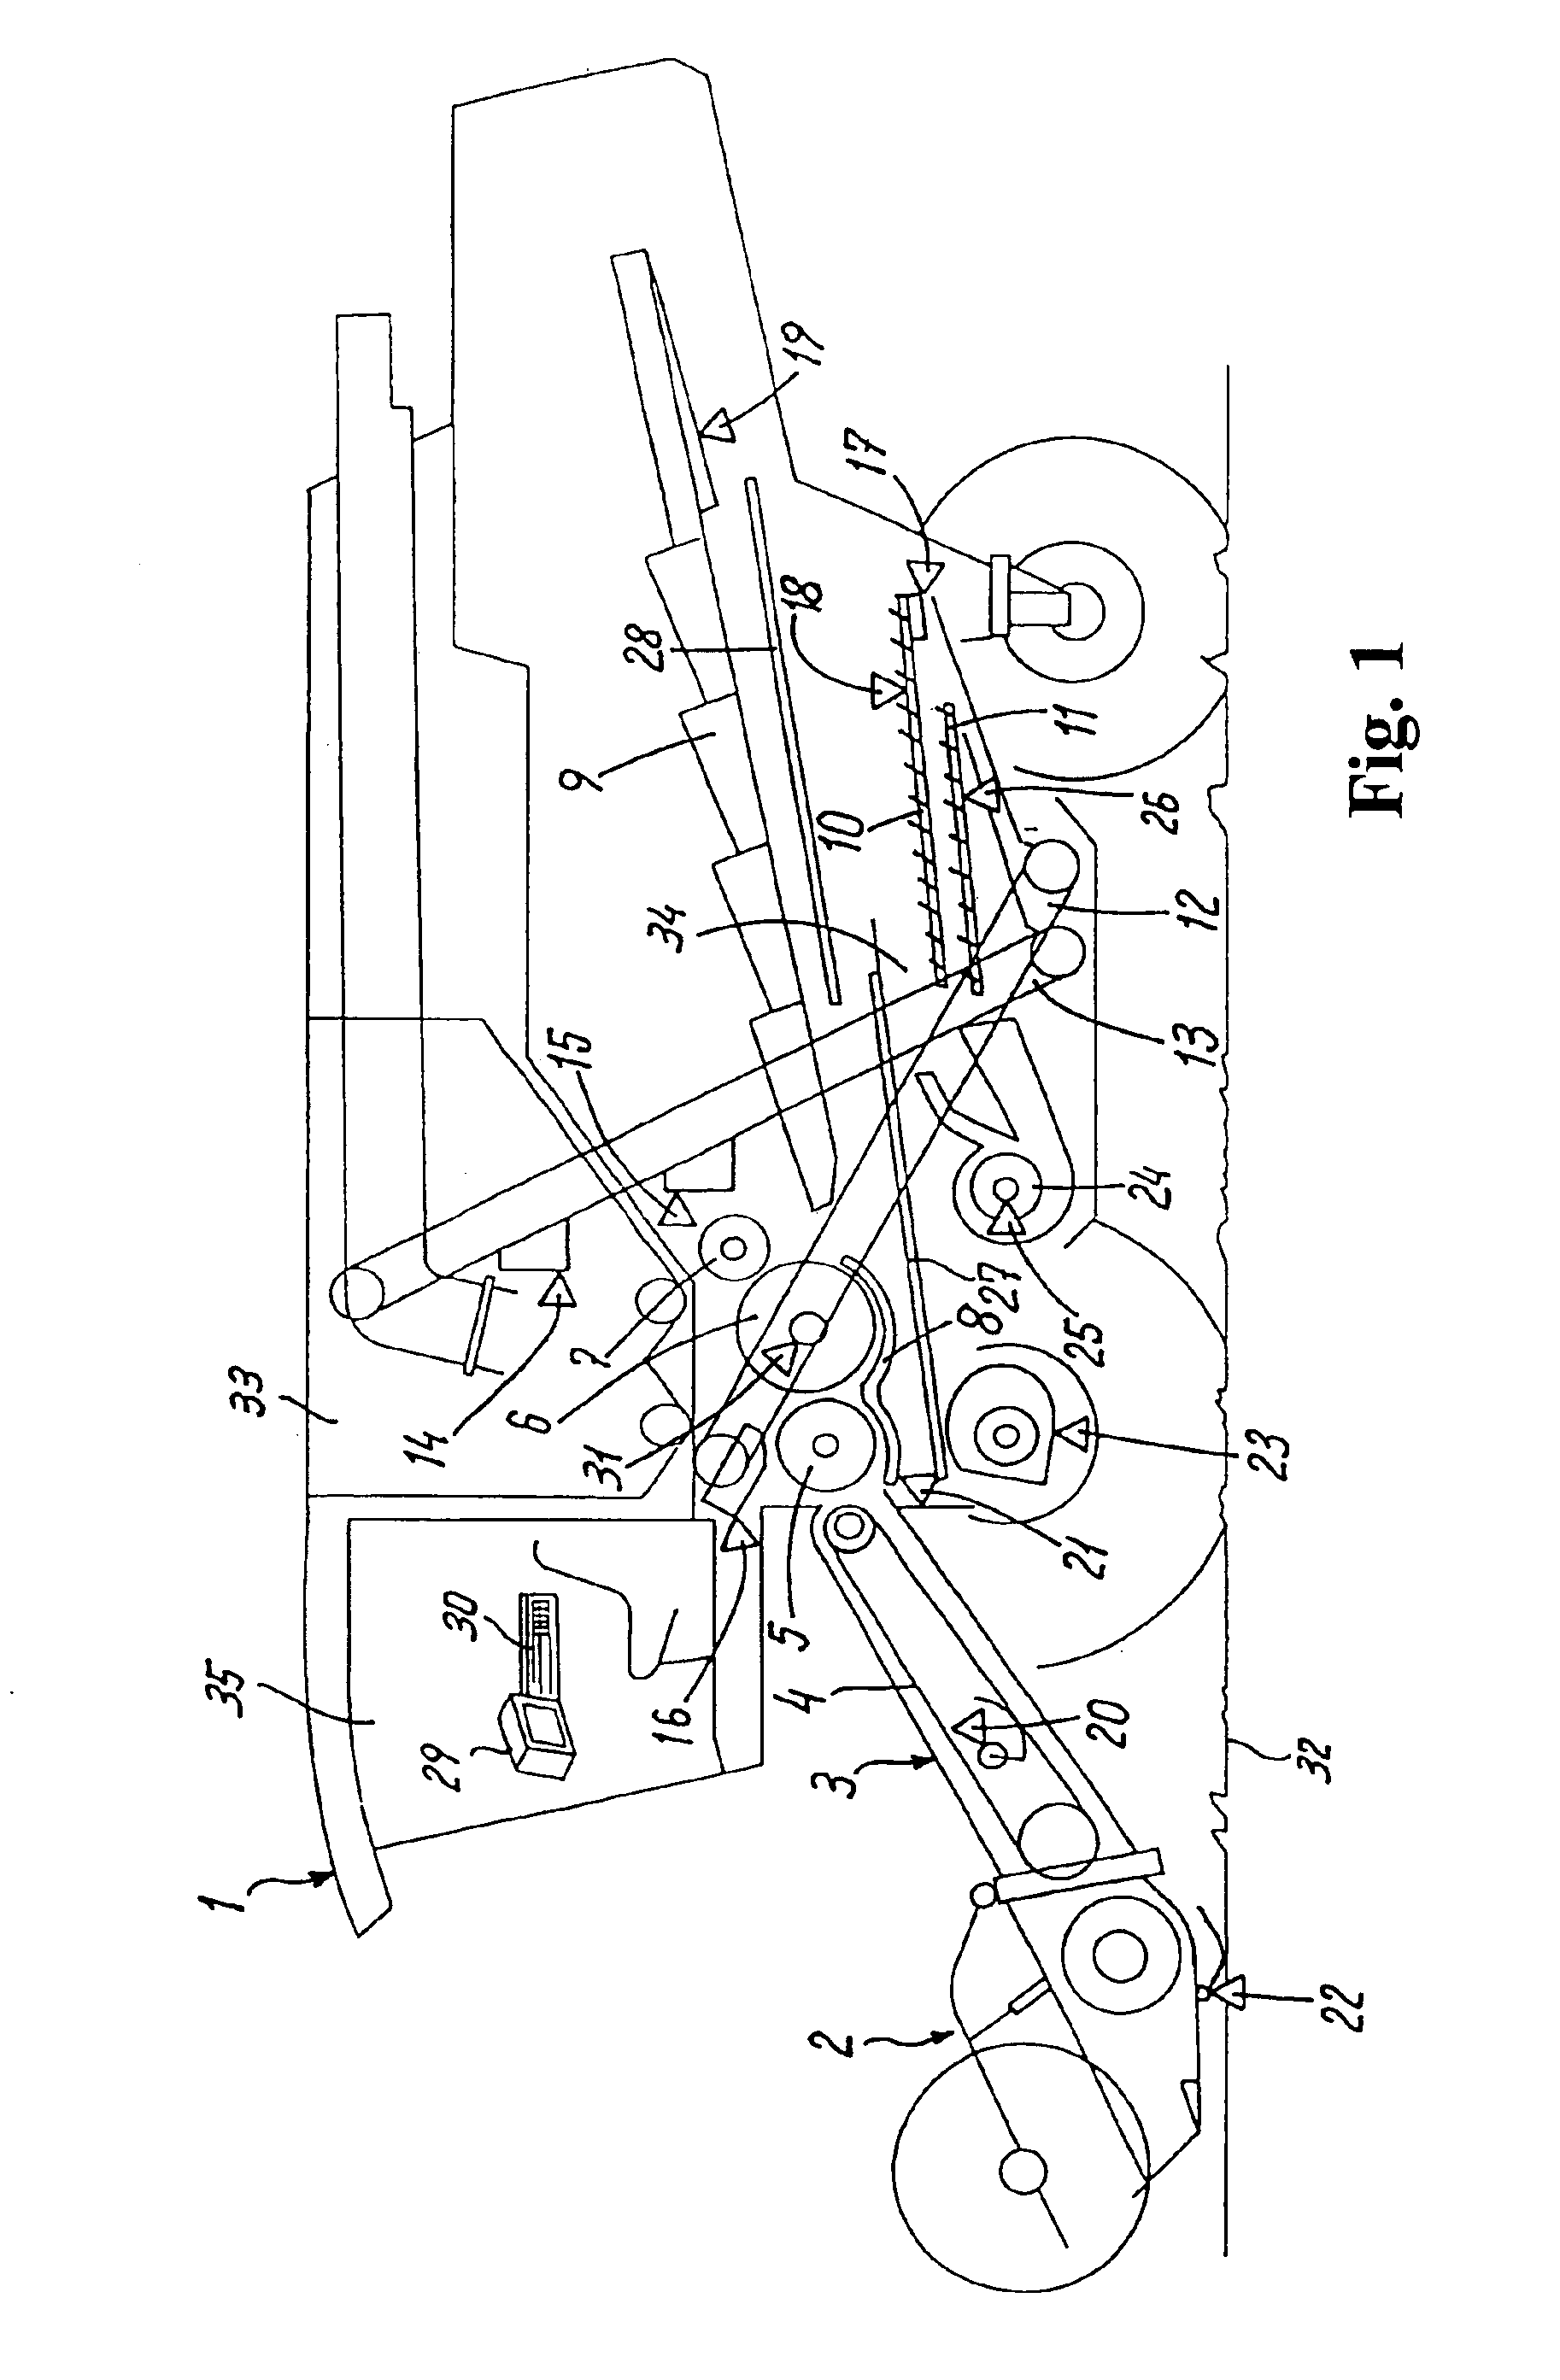 Method and apparatus for determining optimal adjustments of work units in an agricultural harvesting machine